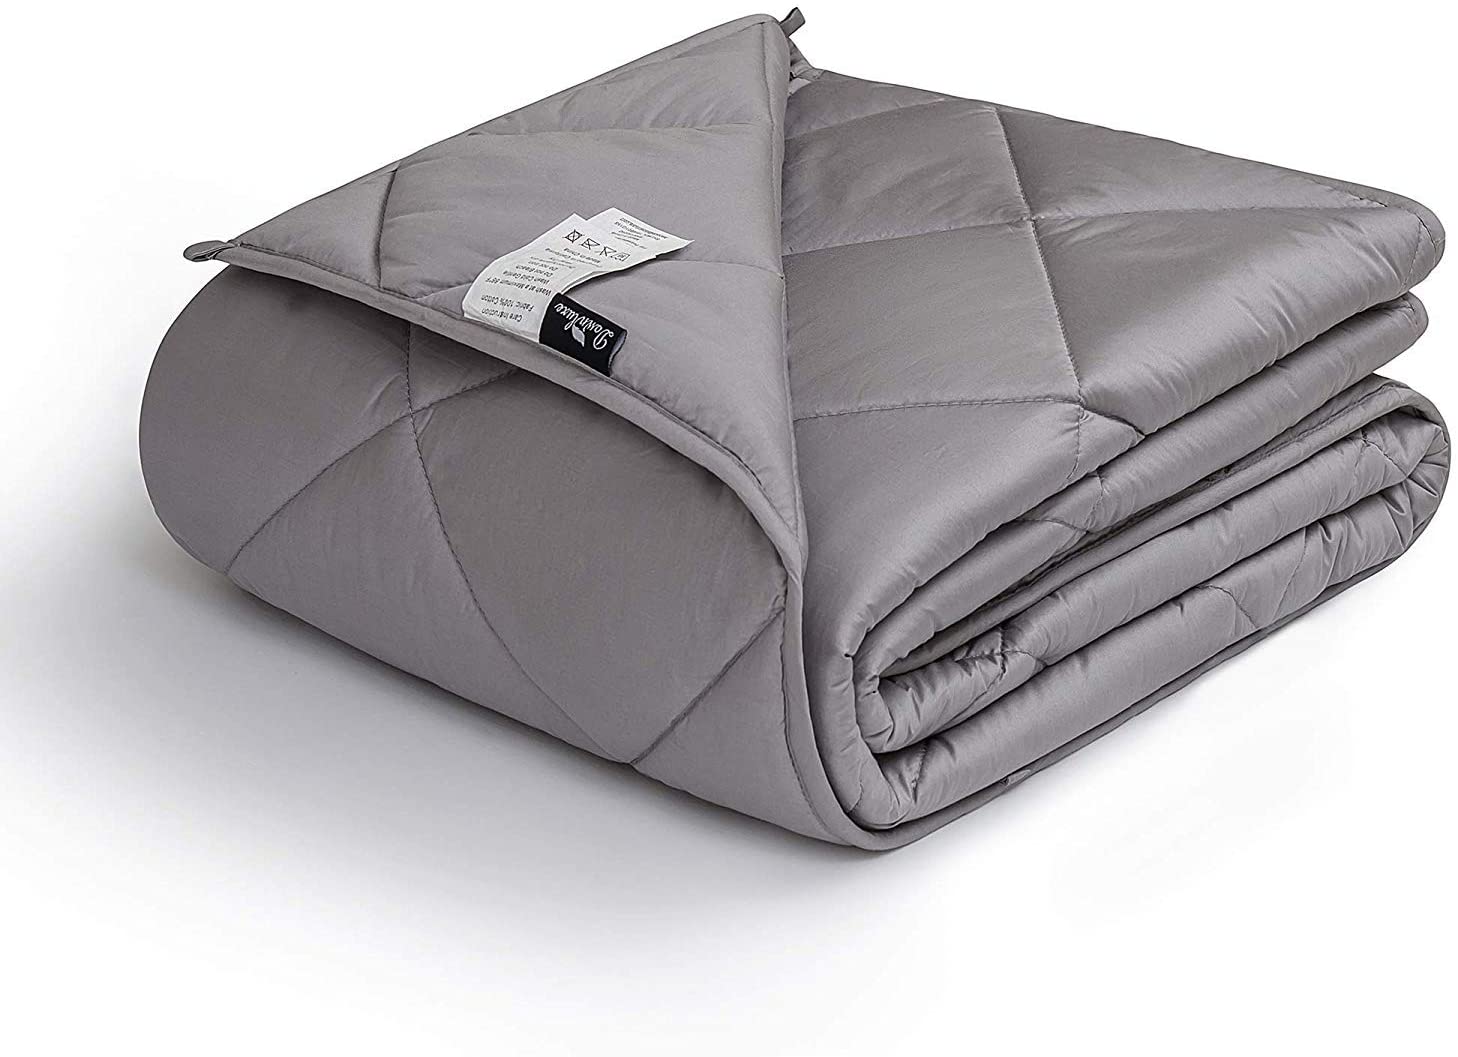 Amazon: $24.99 Weighted Blanket 20 lbs 60×80 w/code (reg. $49.99; SAVE 50%)